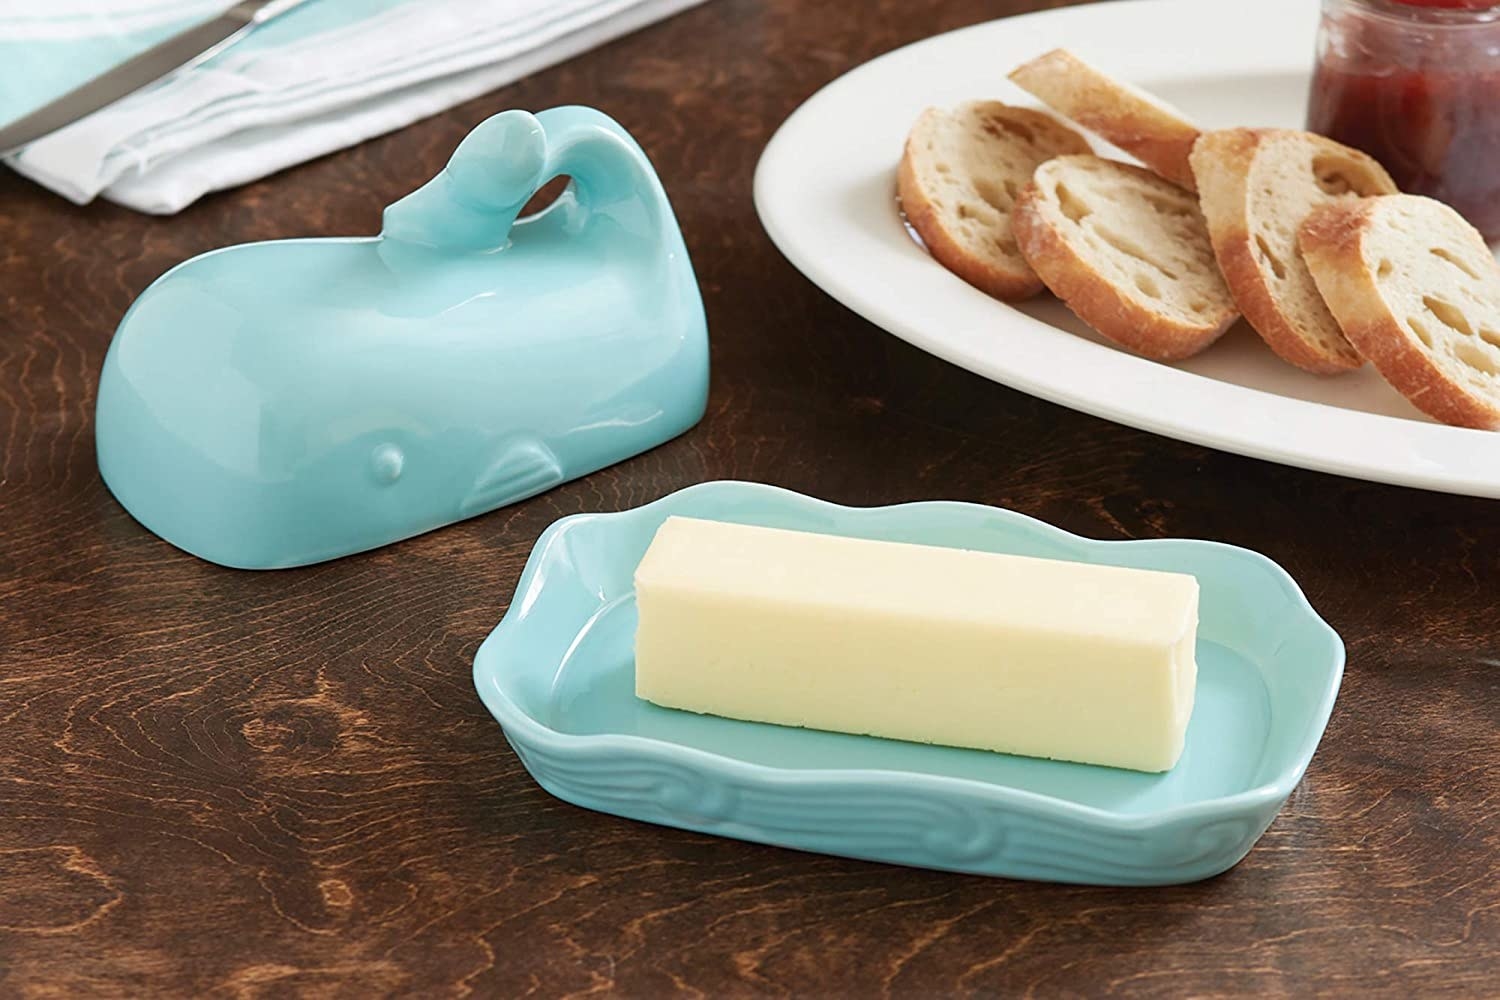 The whale-shaped butter container open on a table next to some crusty bread